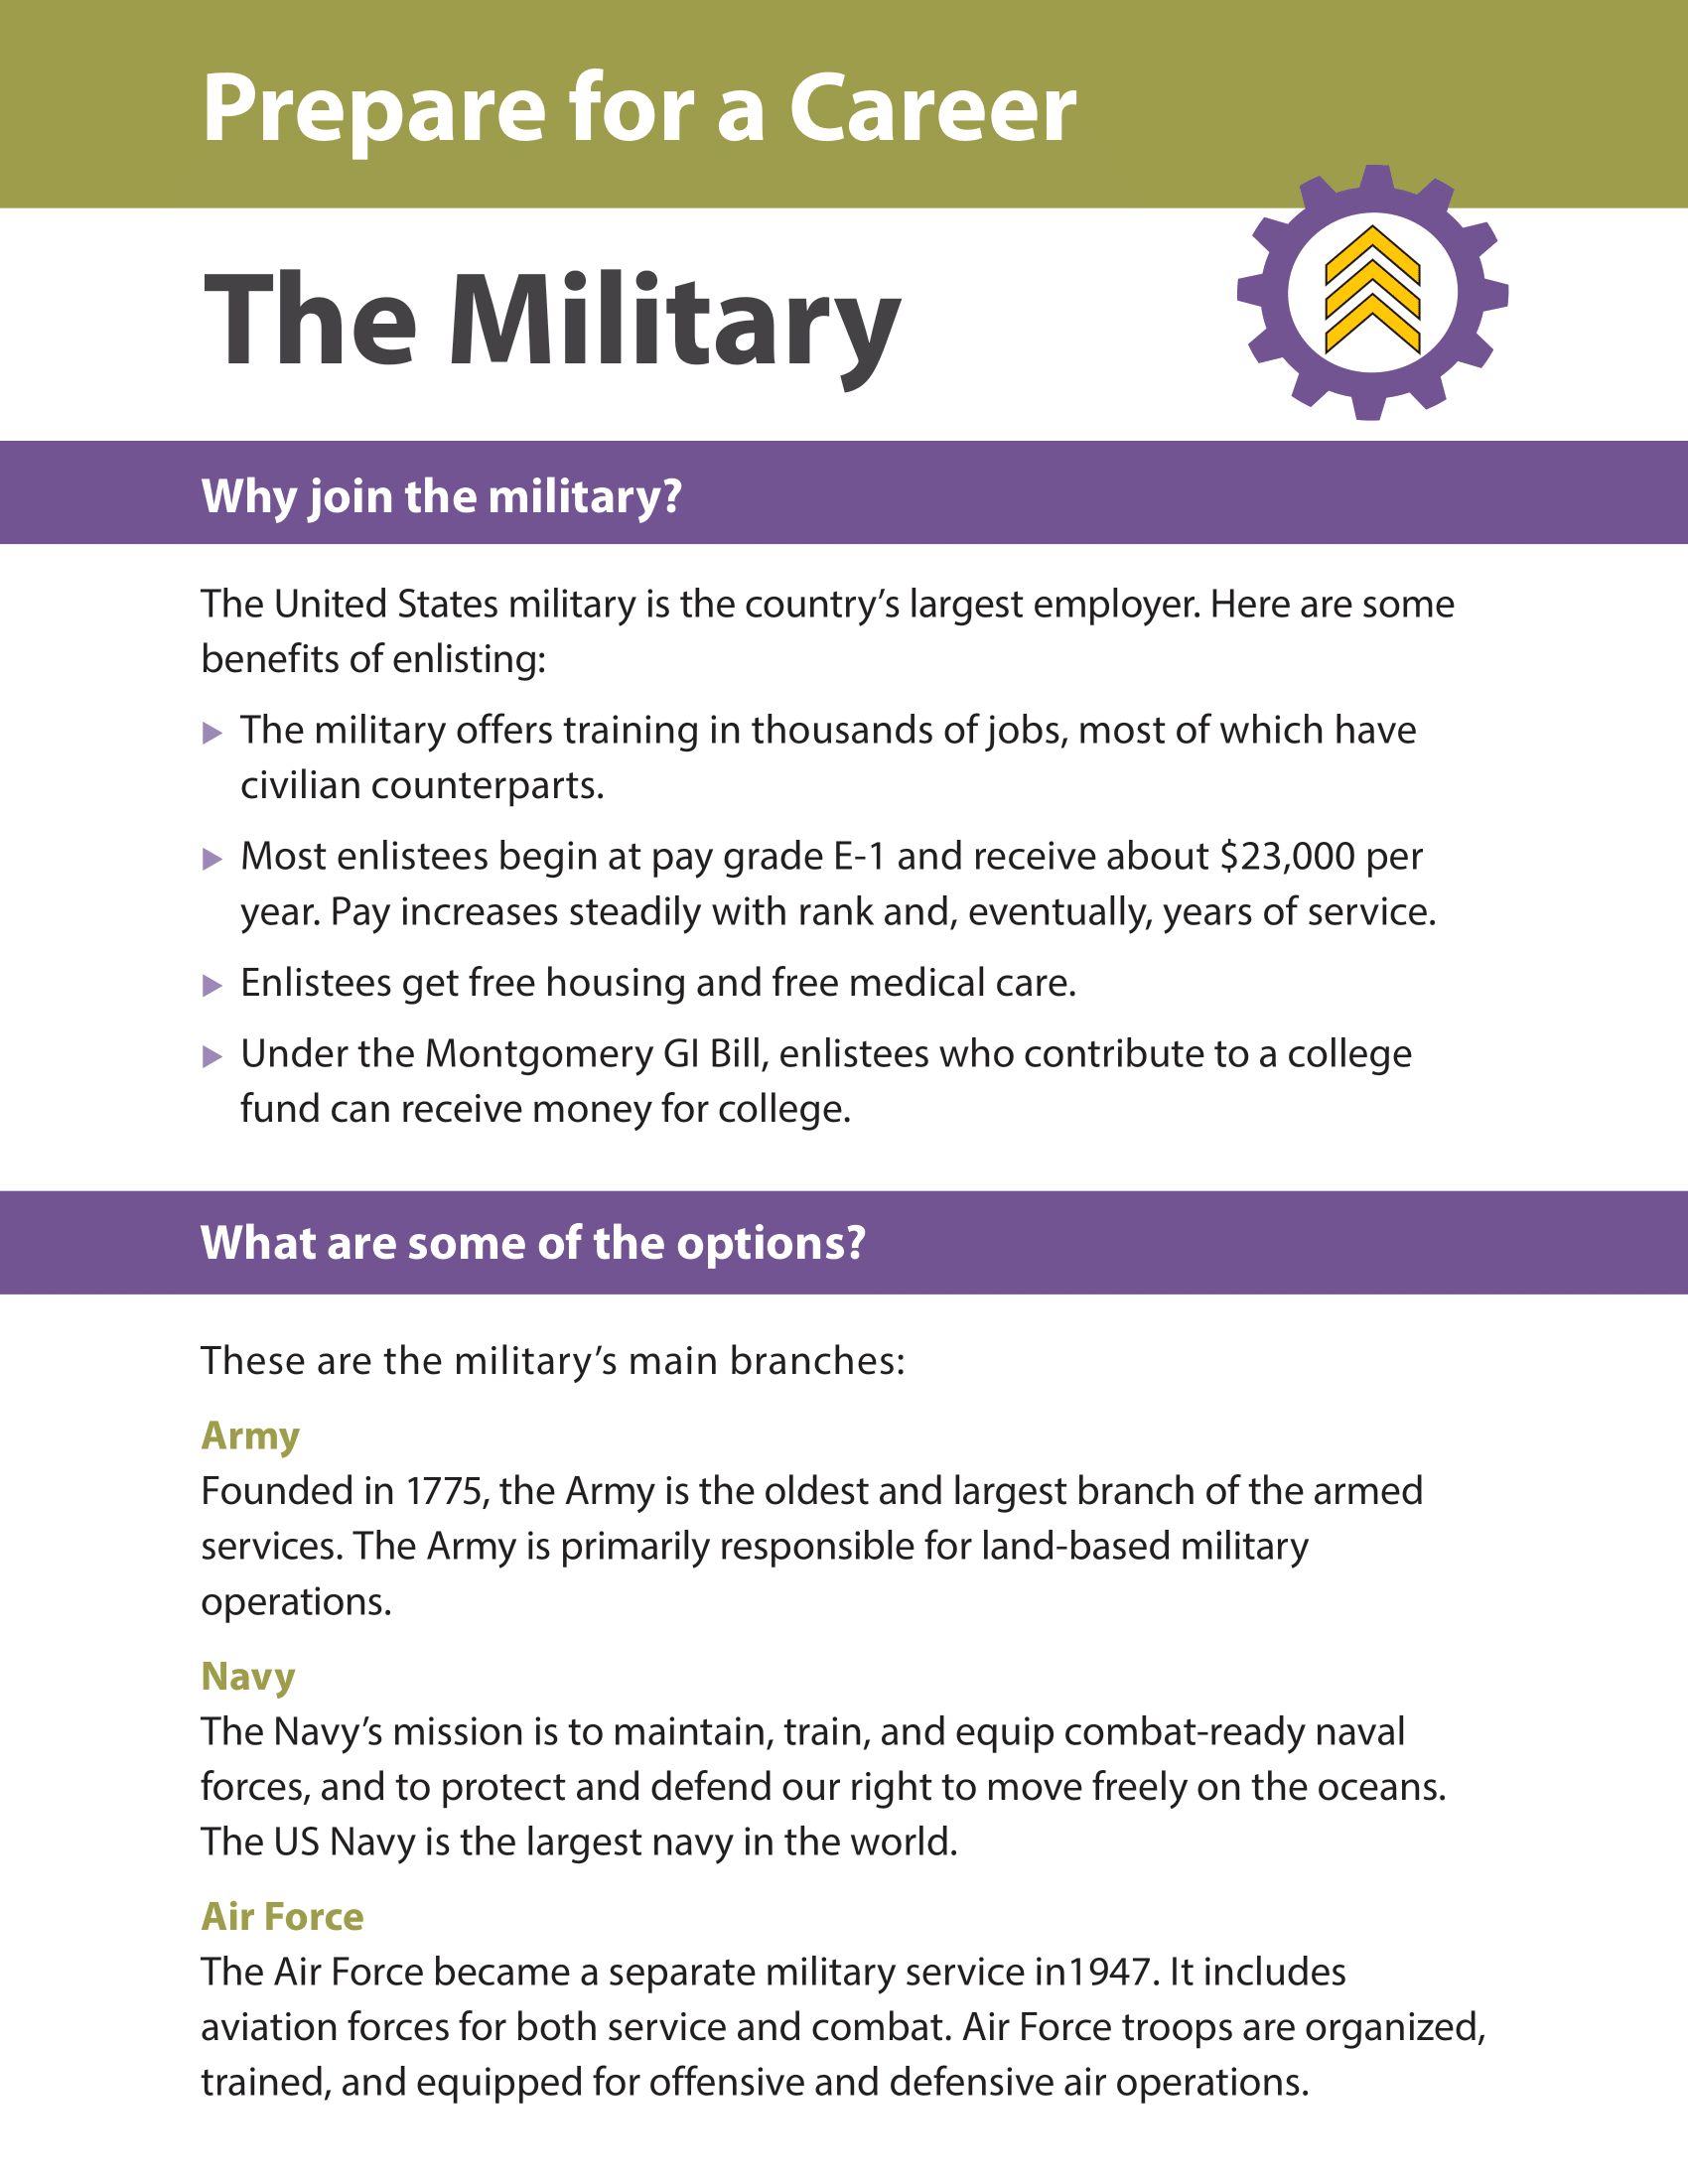 Prepare for a Career - The Military